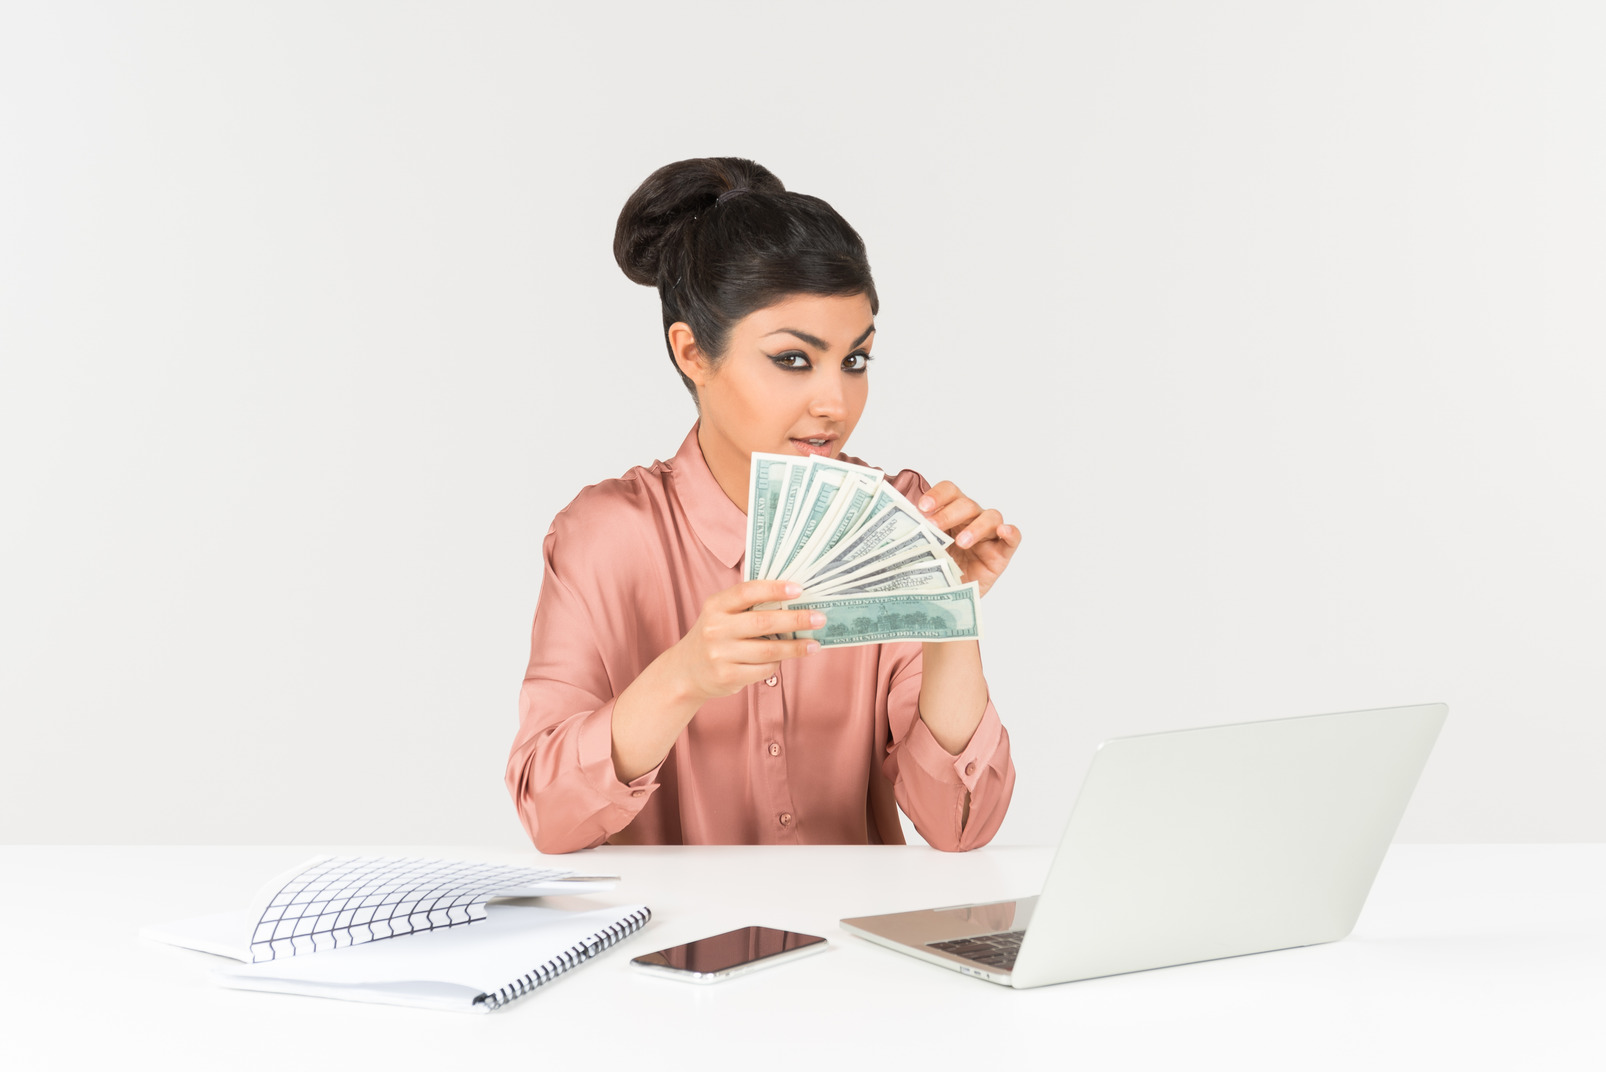 Young indian woman sitting in front of laptop and holding money bills